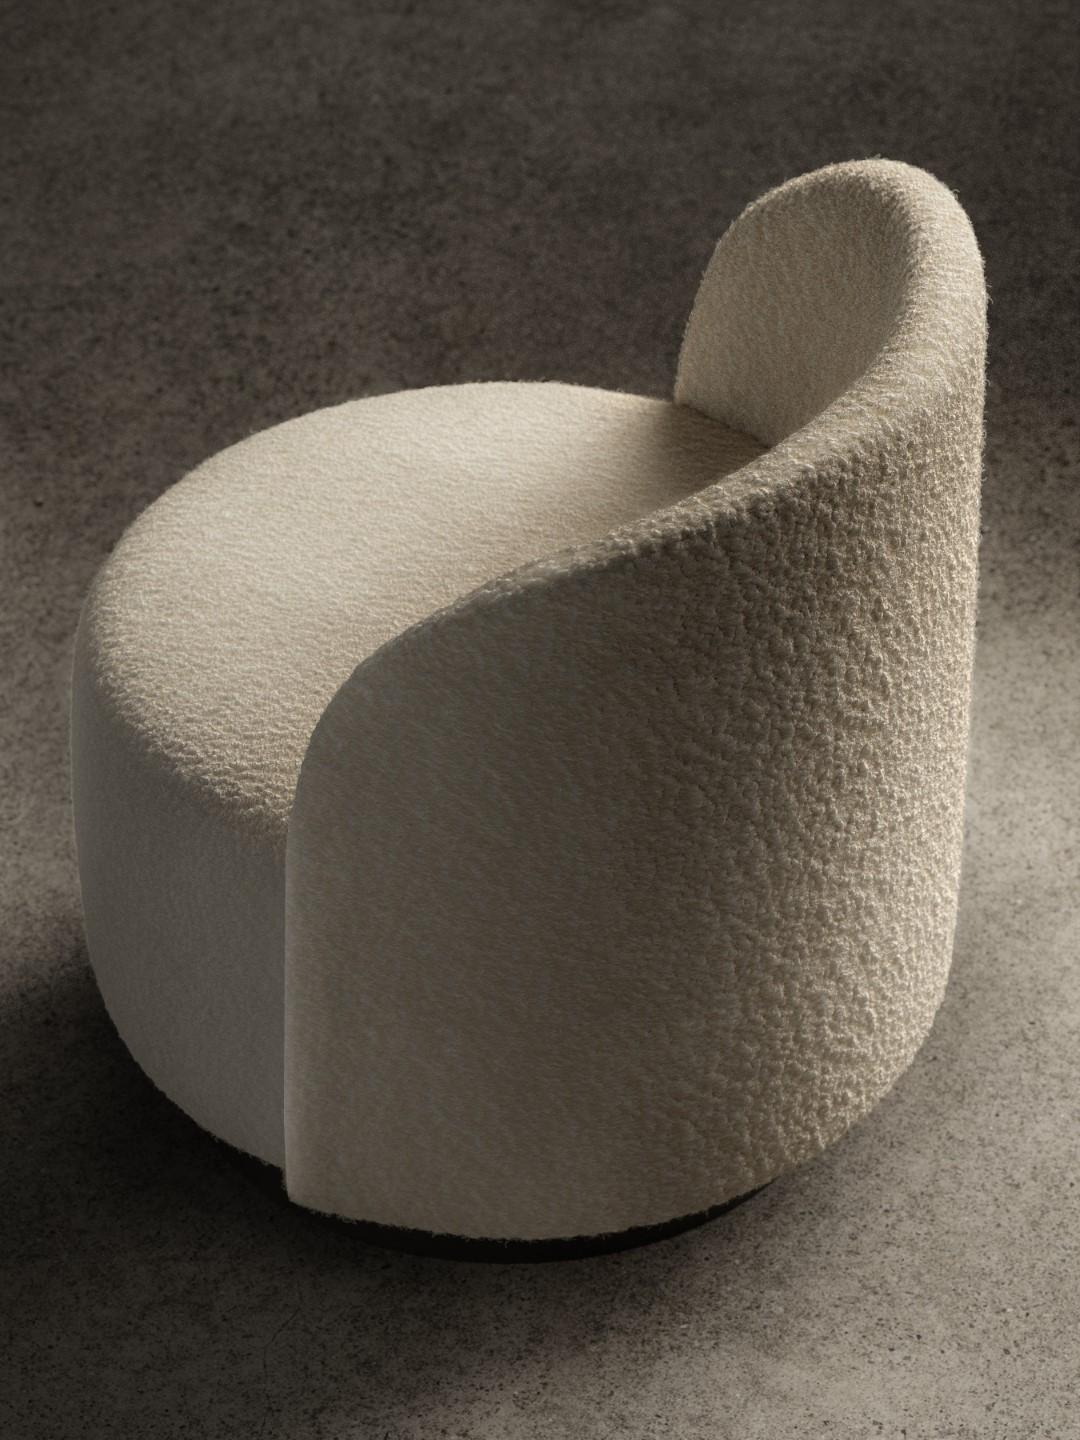 DIG IT is an armchair with a cylindrical seat and an enveloping backrest. The wooden shell is covered with differentiated density polyurethane foam and finished with a top layer of acrylic fiber. The base can be made of matt black lacquered wood or